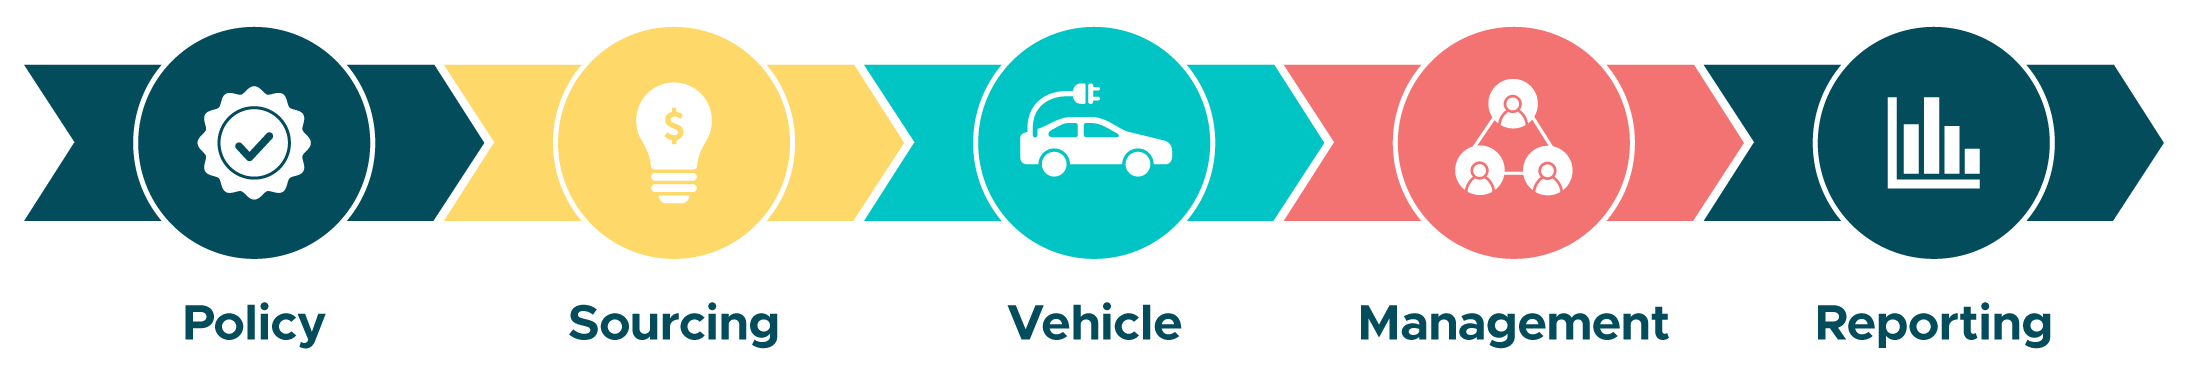 A series of icons depicting electric vehicle management and safety reporting.